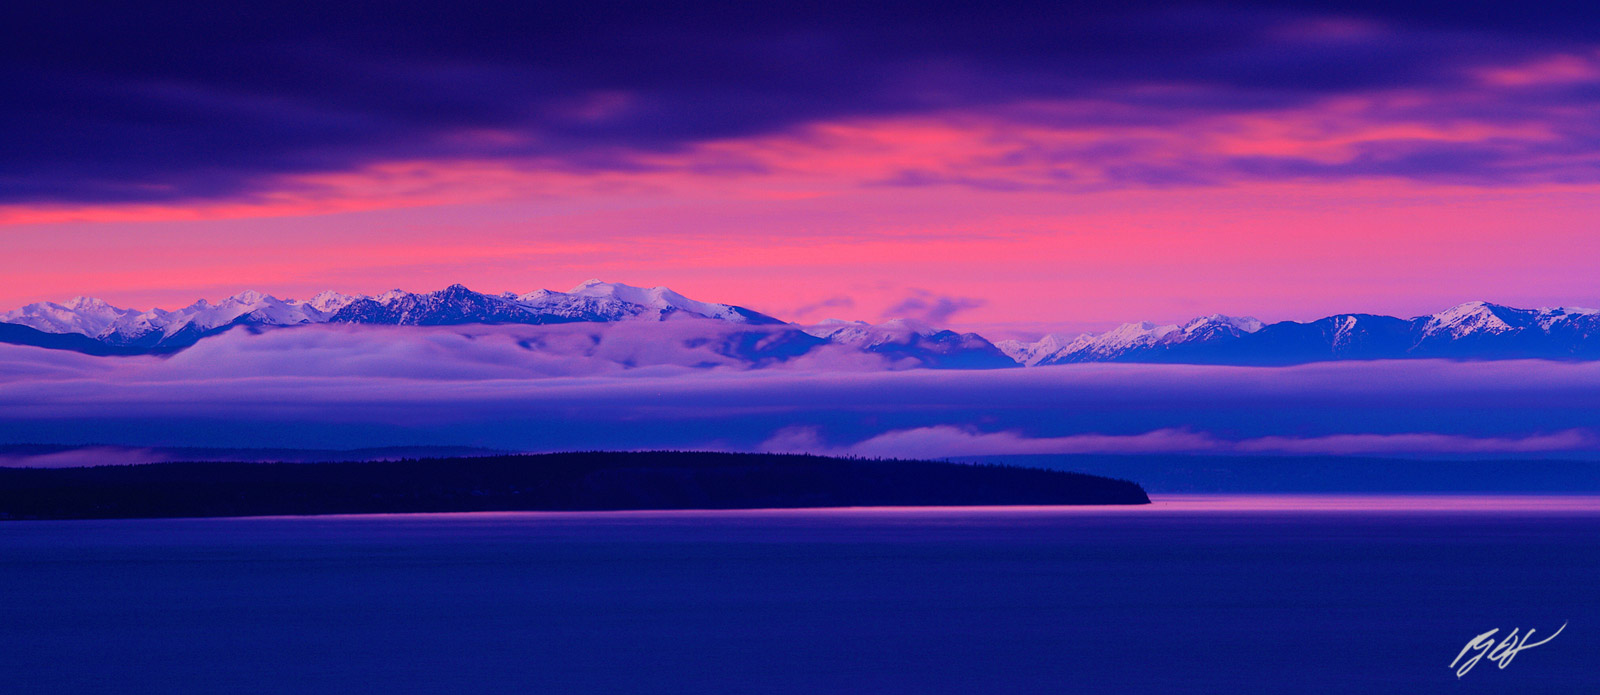 Sunrise with the Olympic Mountains in the Clouds from Whidbey Island in Washington